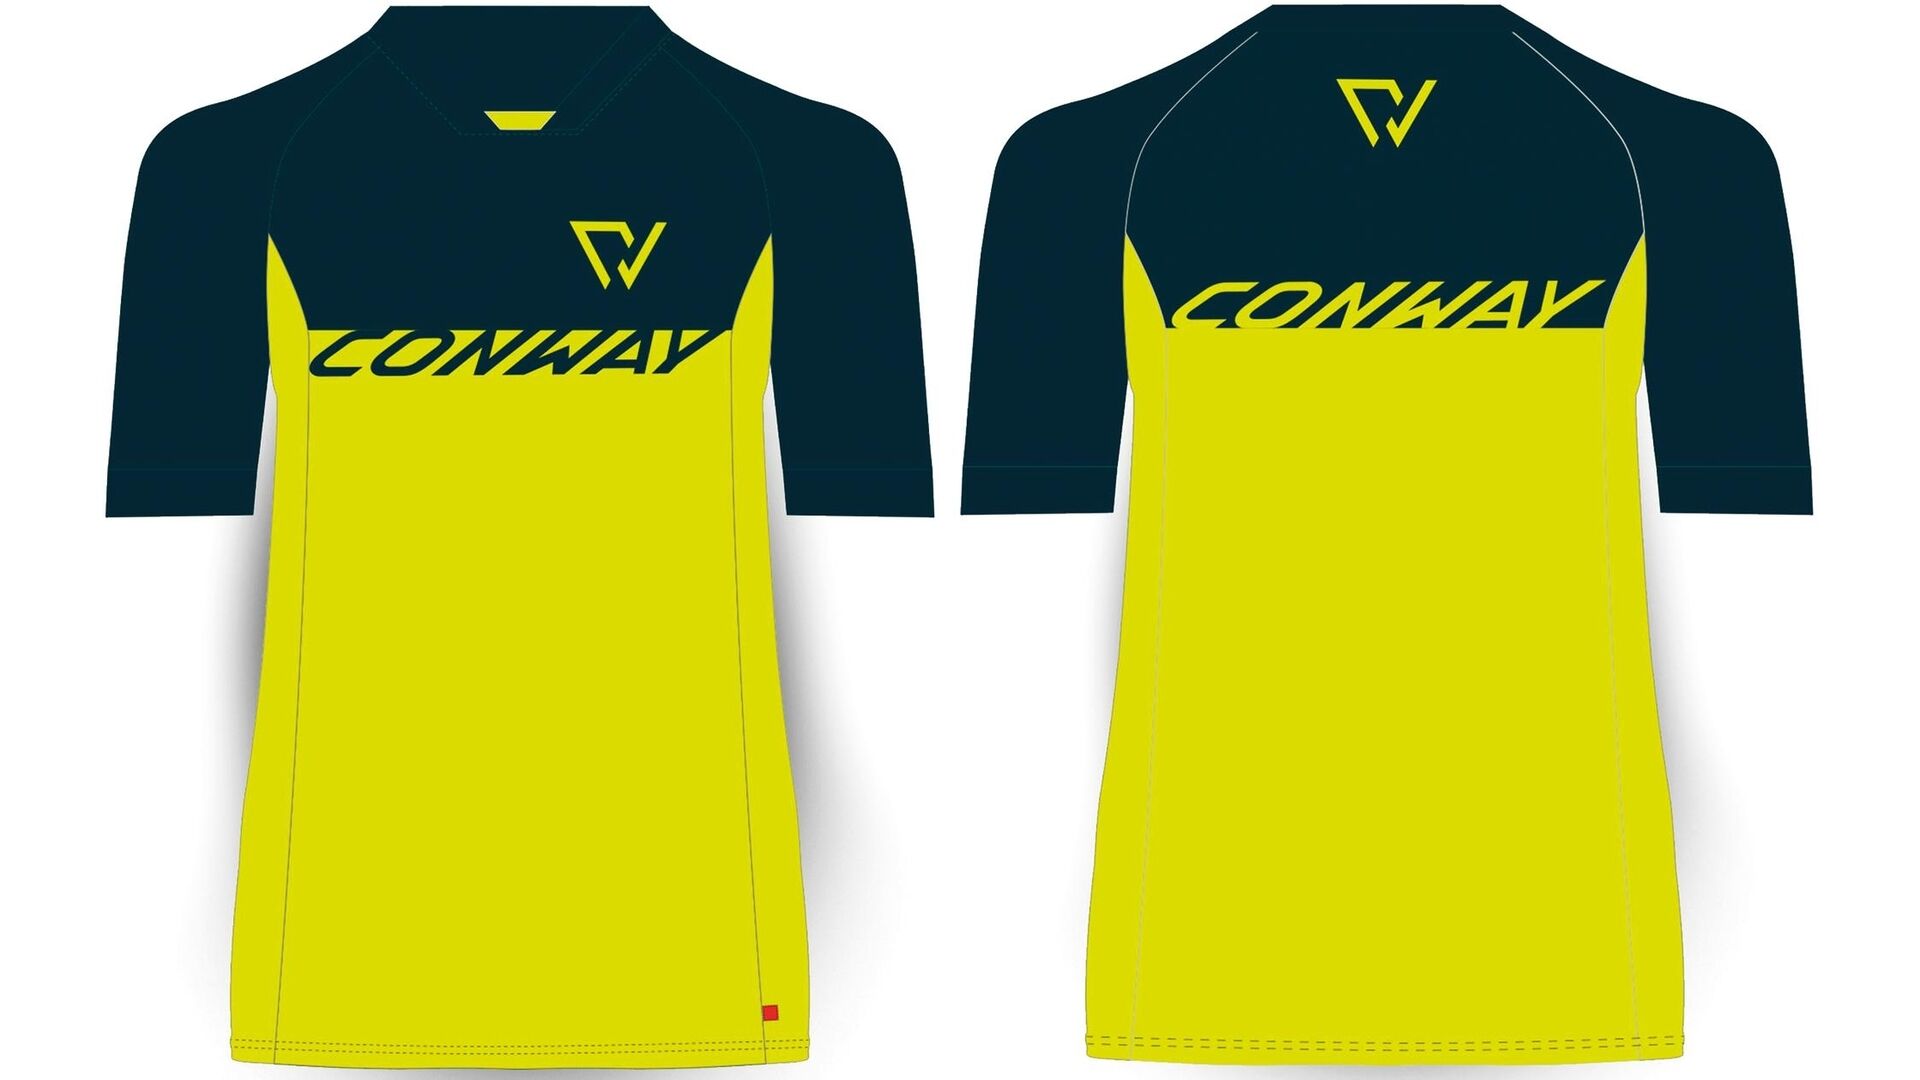 Conway Shortarm Jersey Trail Jersey SS 